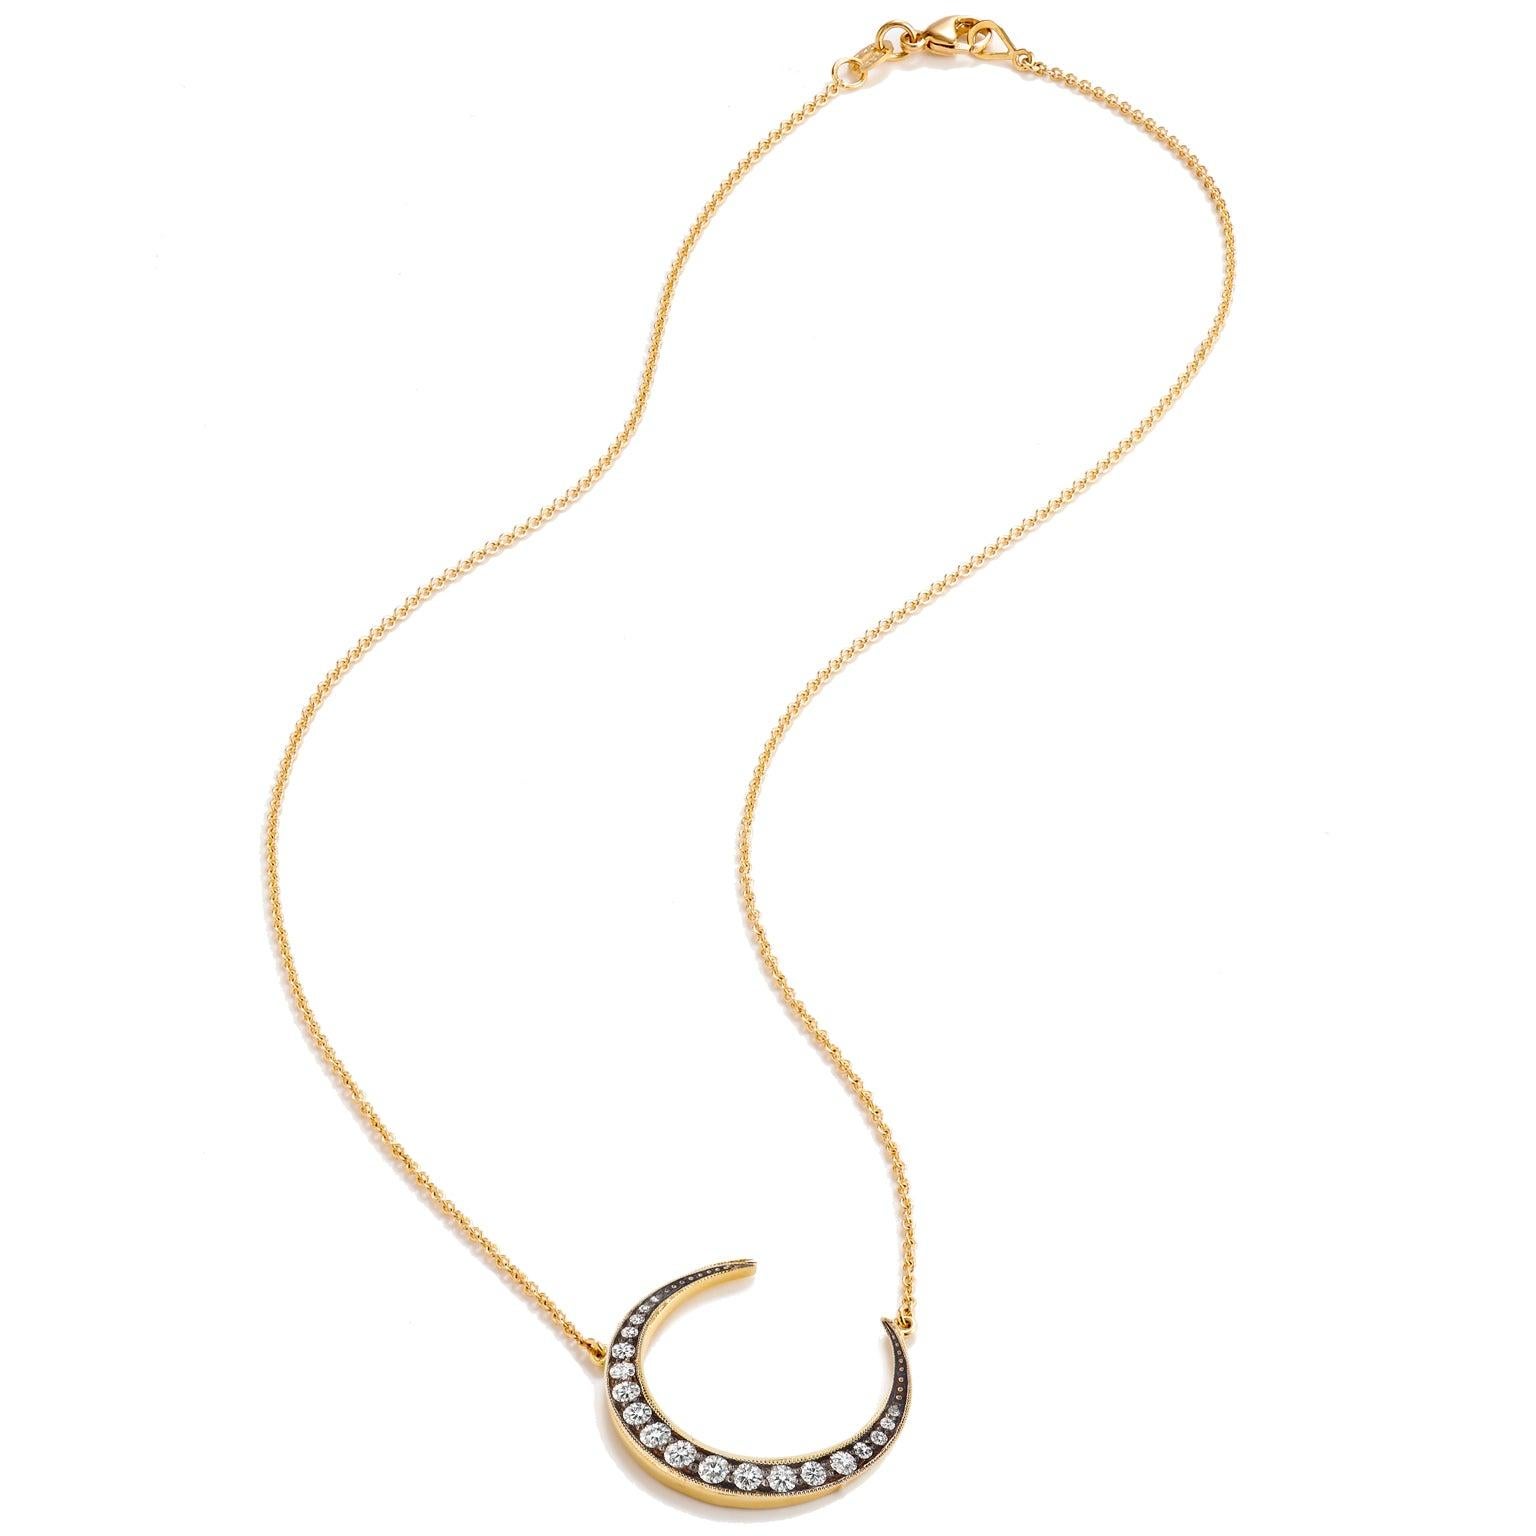 0.43 carat of pave-set diamond expand the surface of this crescent moon pendant strung on 18 karat yellow gold chain. A piece one can't help but gravitate toward.
